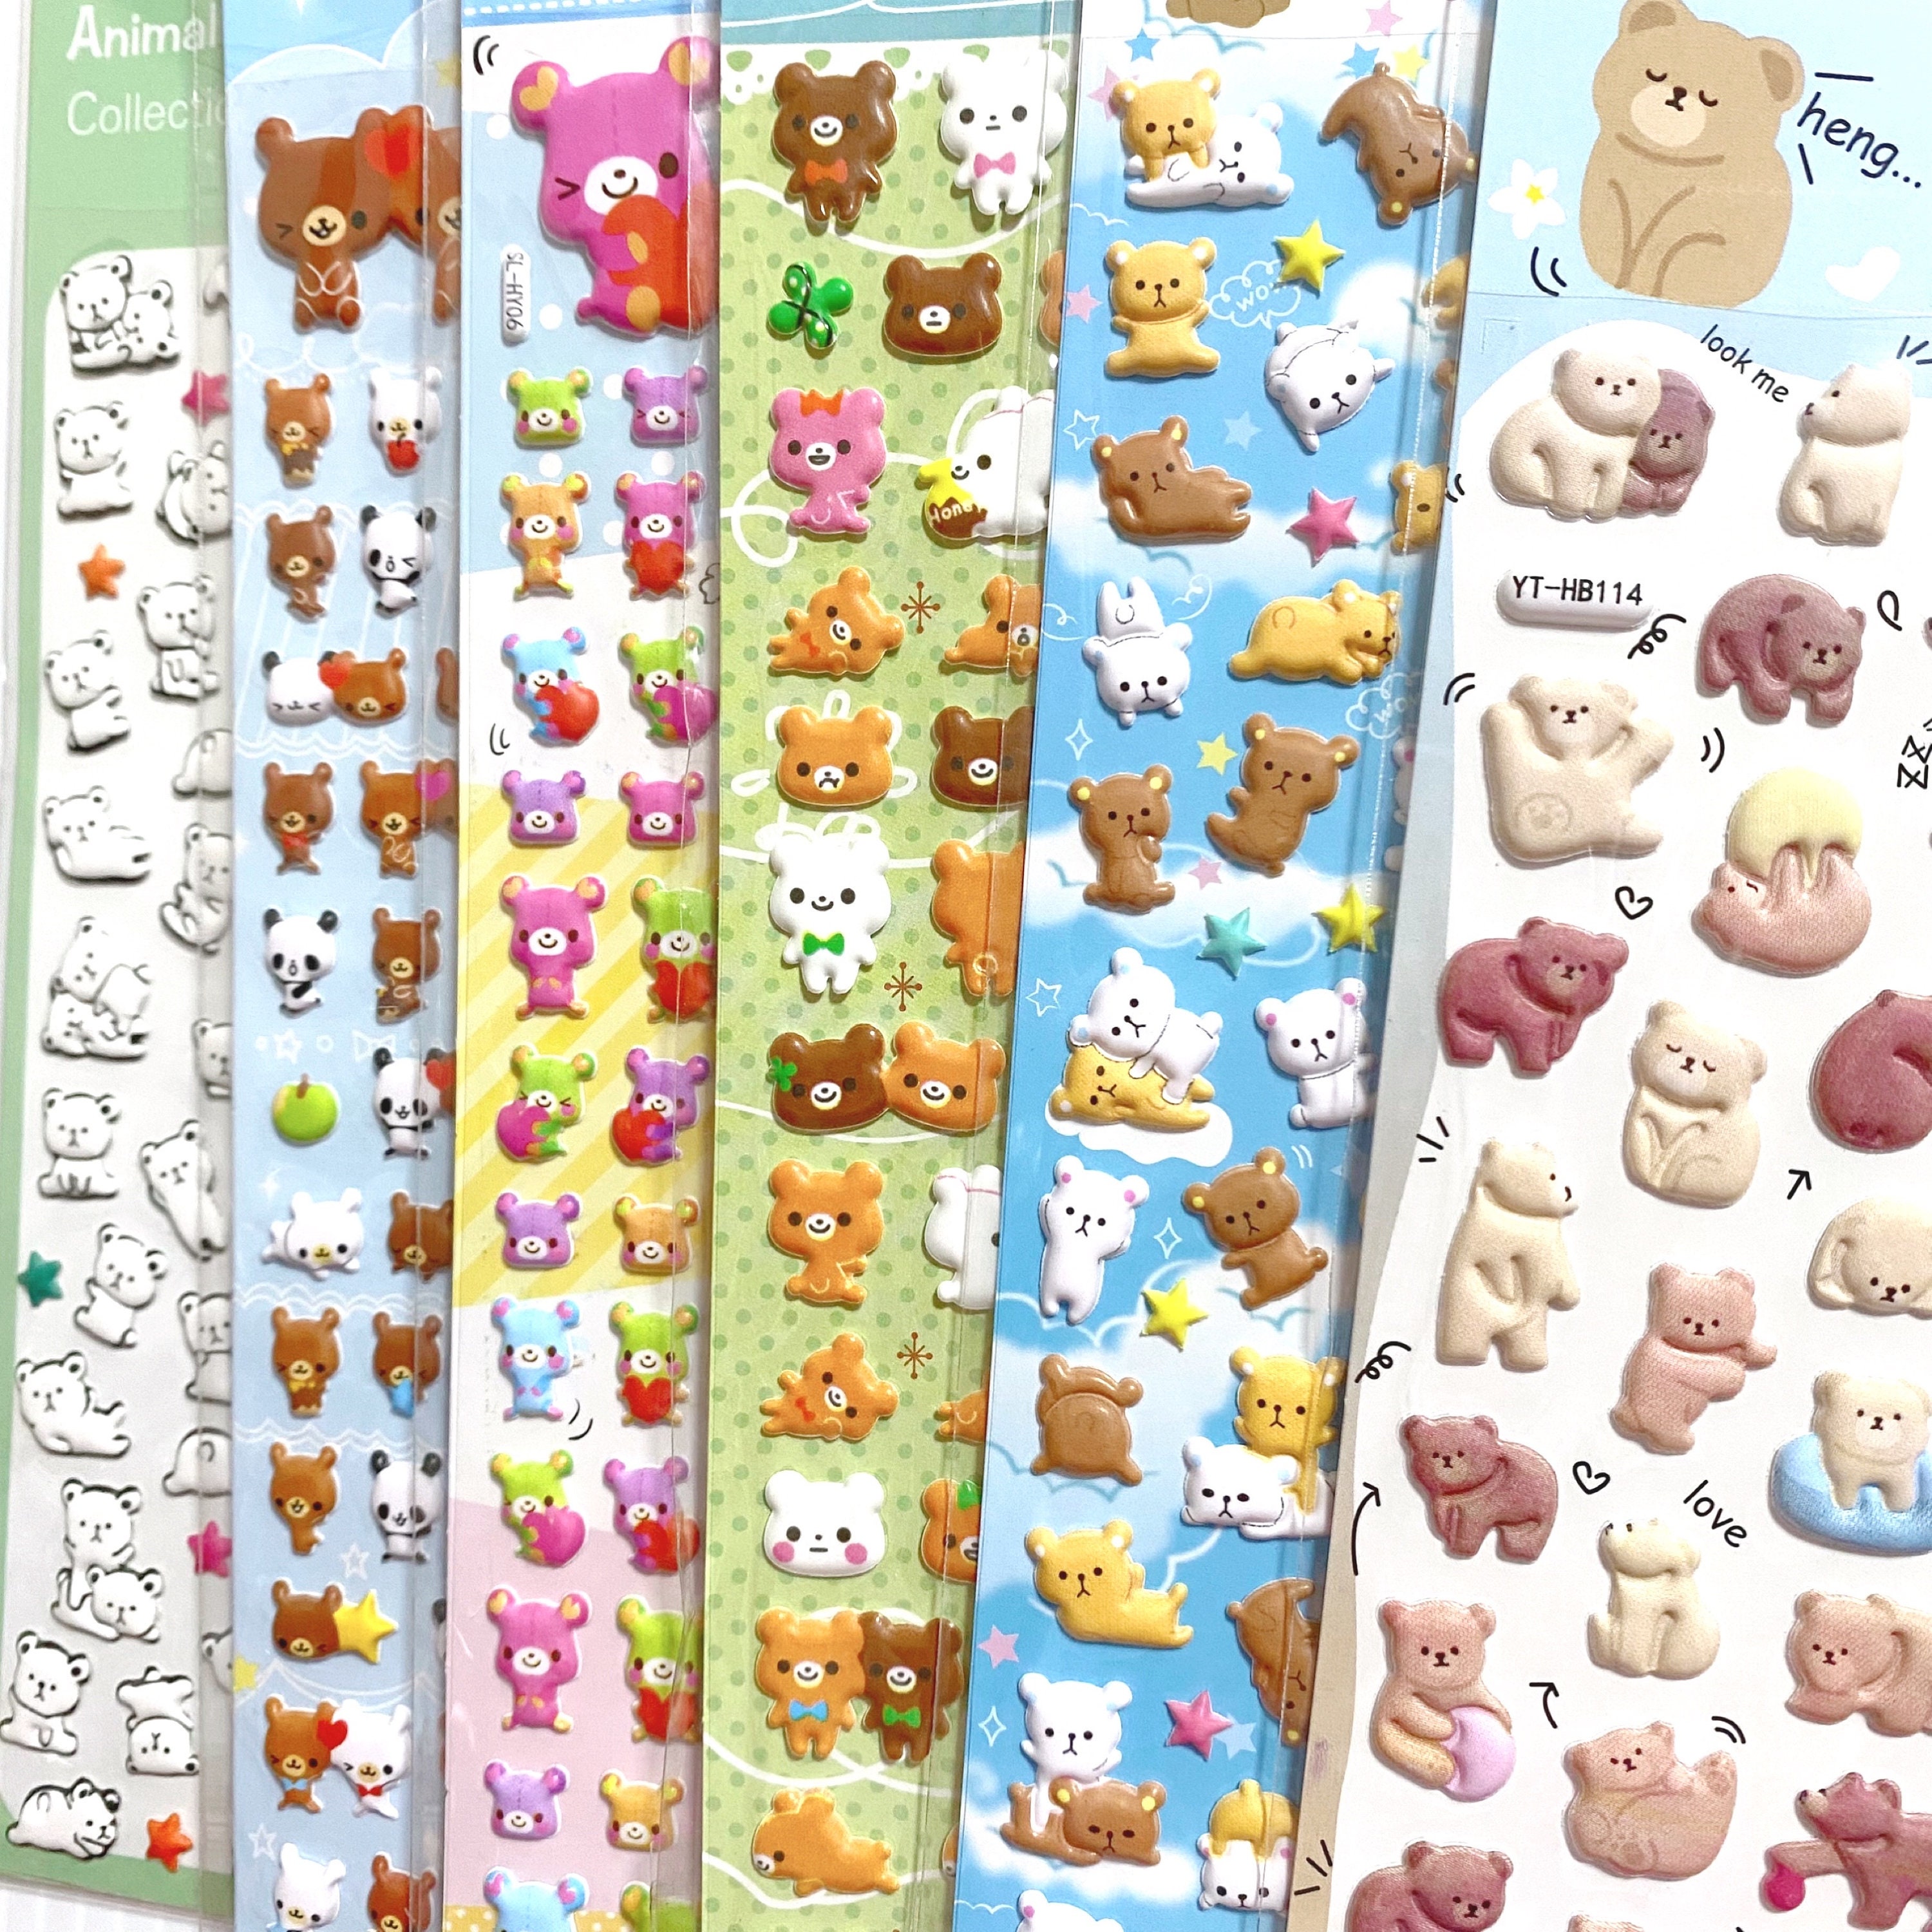 Winter Sayings Planner Stickers Winter Quote Stickers Winter Stickers  Snowman Stickers Polar Bear Stickers Snowflake Stickers 